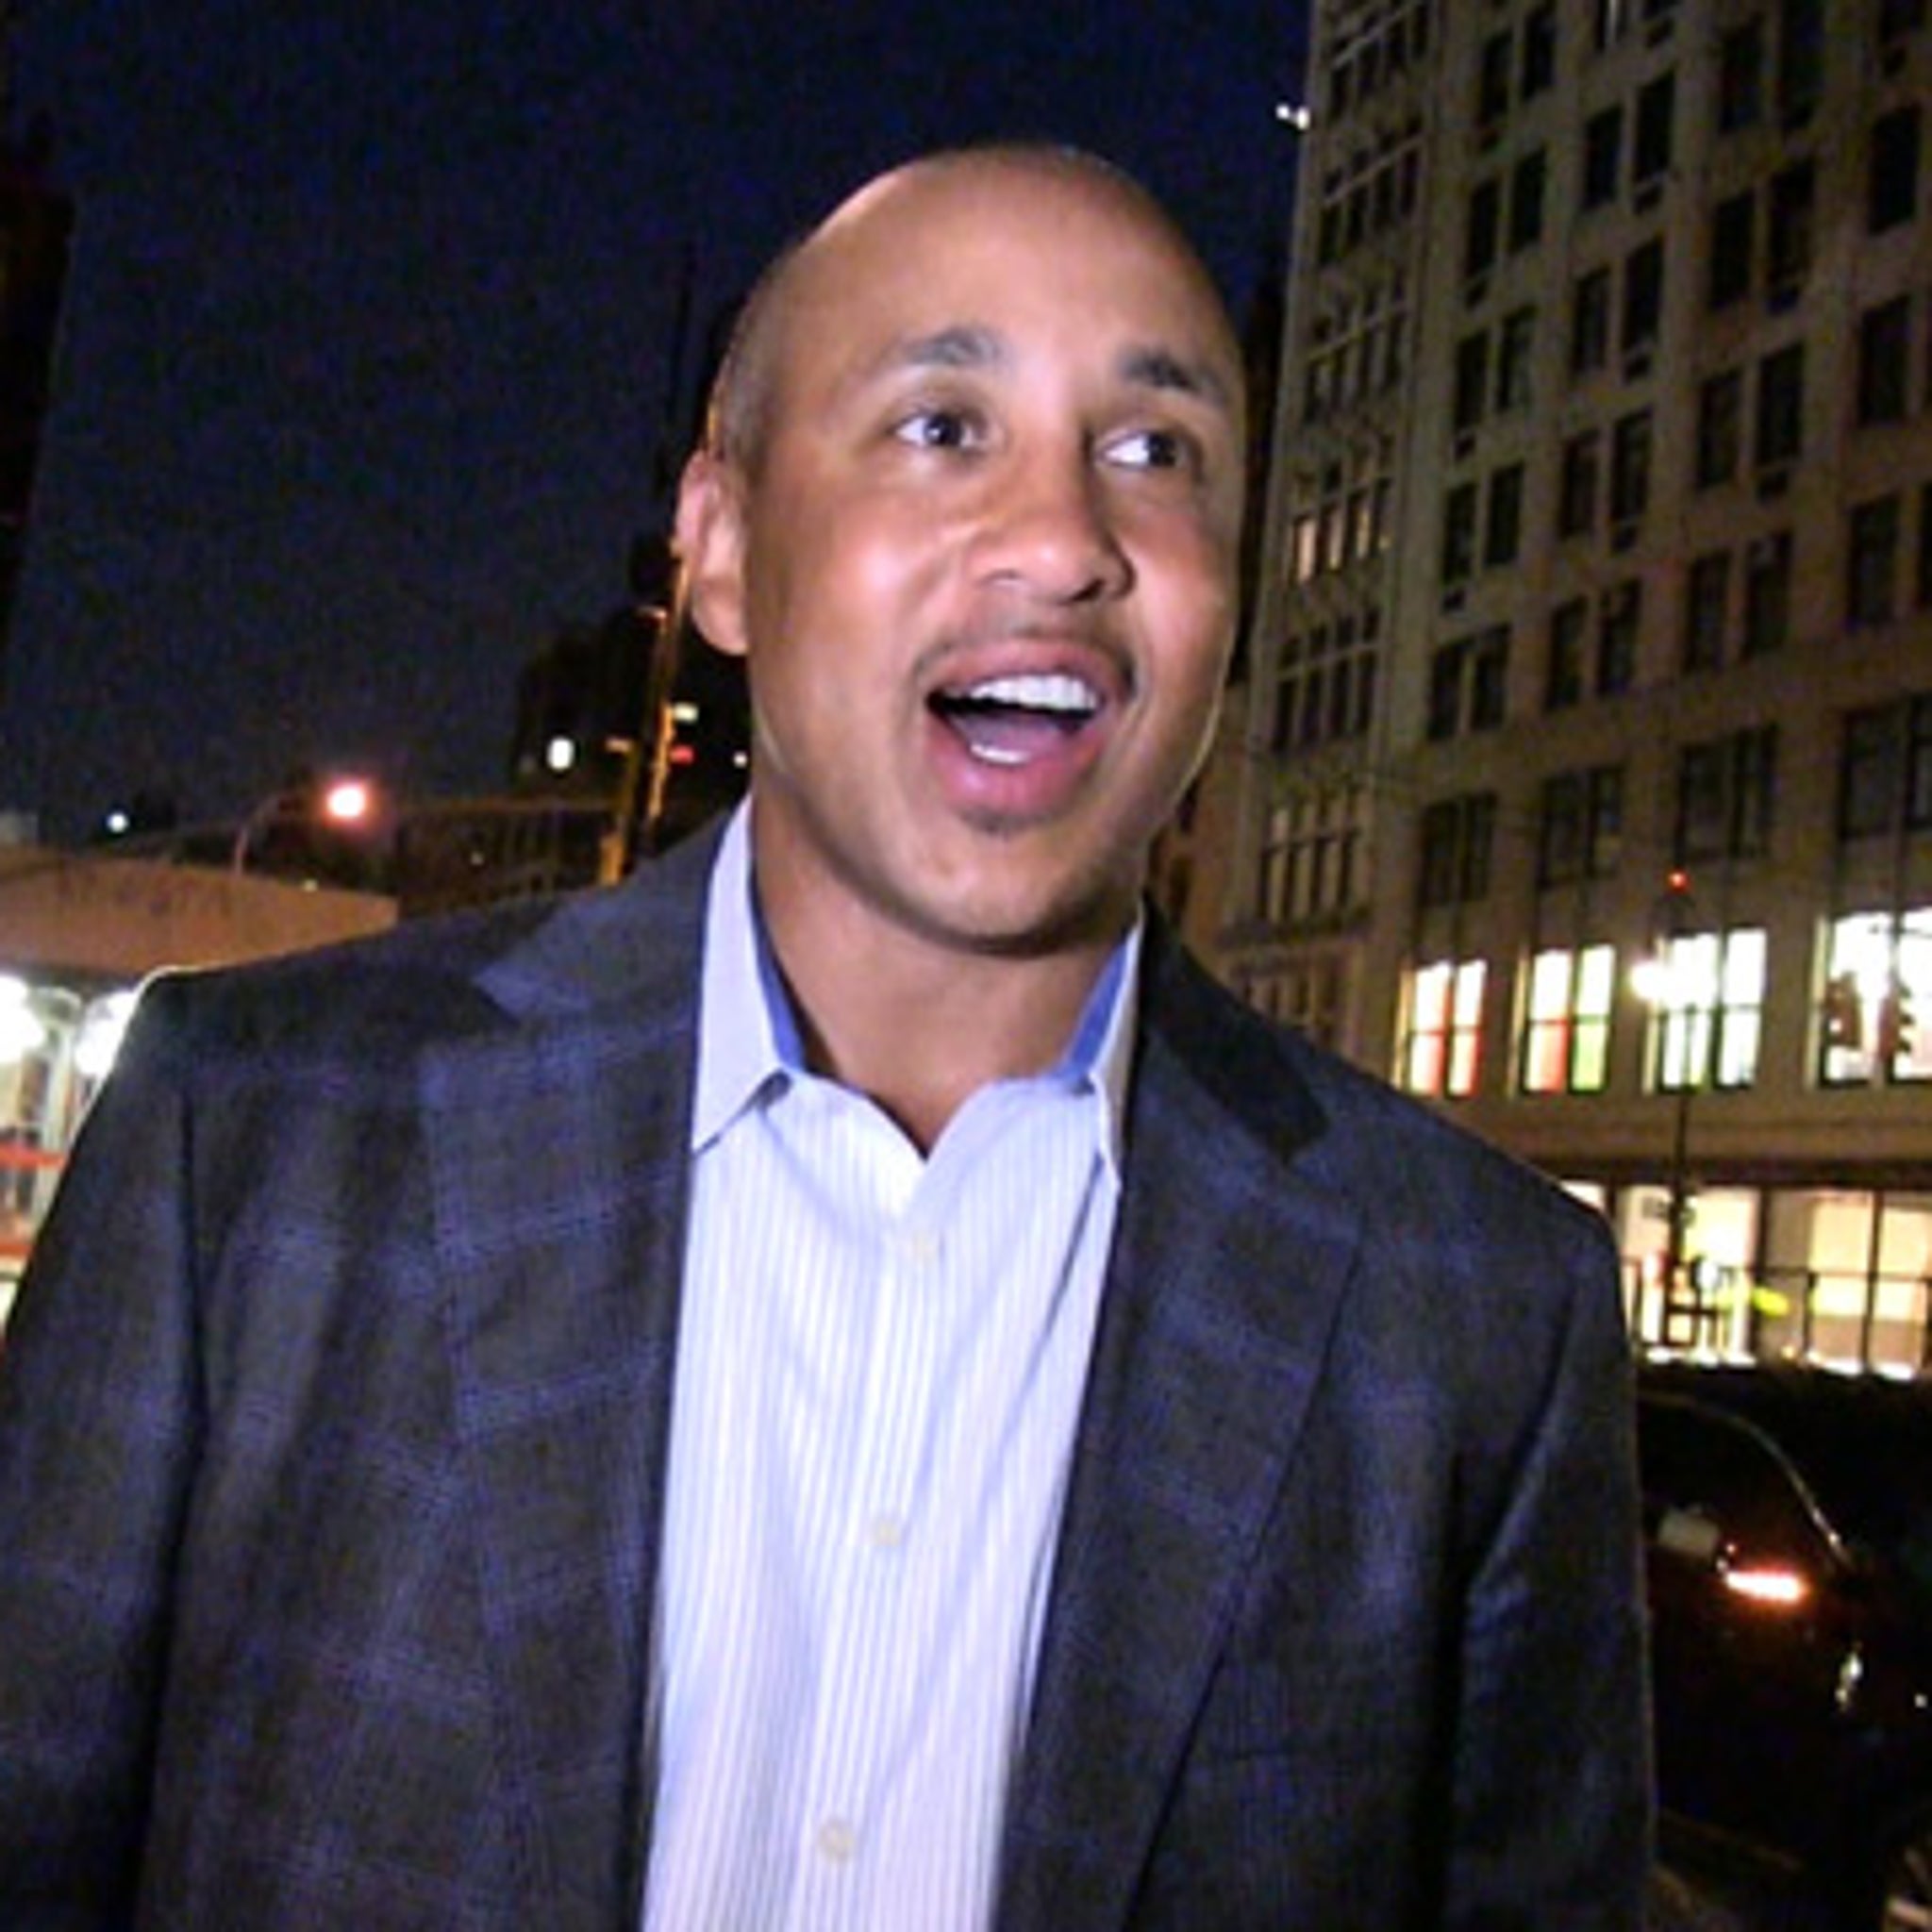 John Starks tried to dunk on Patrick Ewing in a desperate attempt